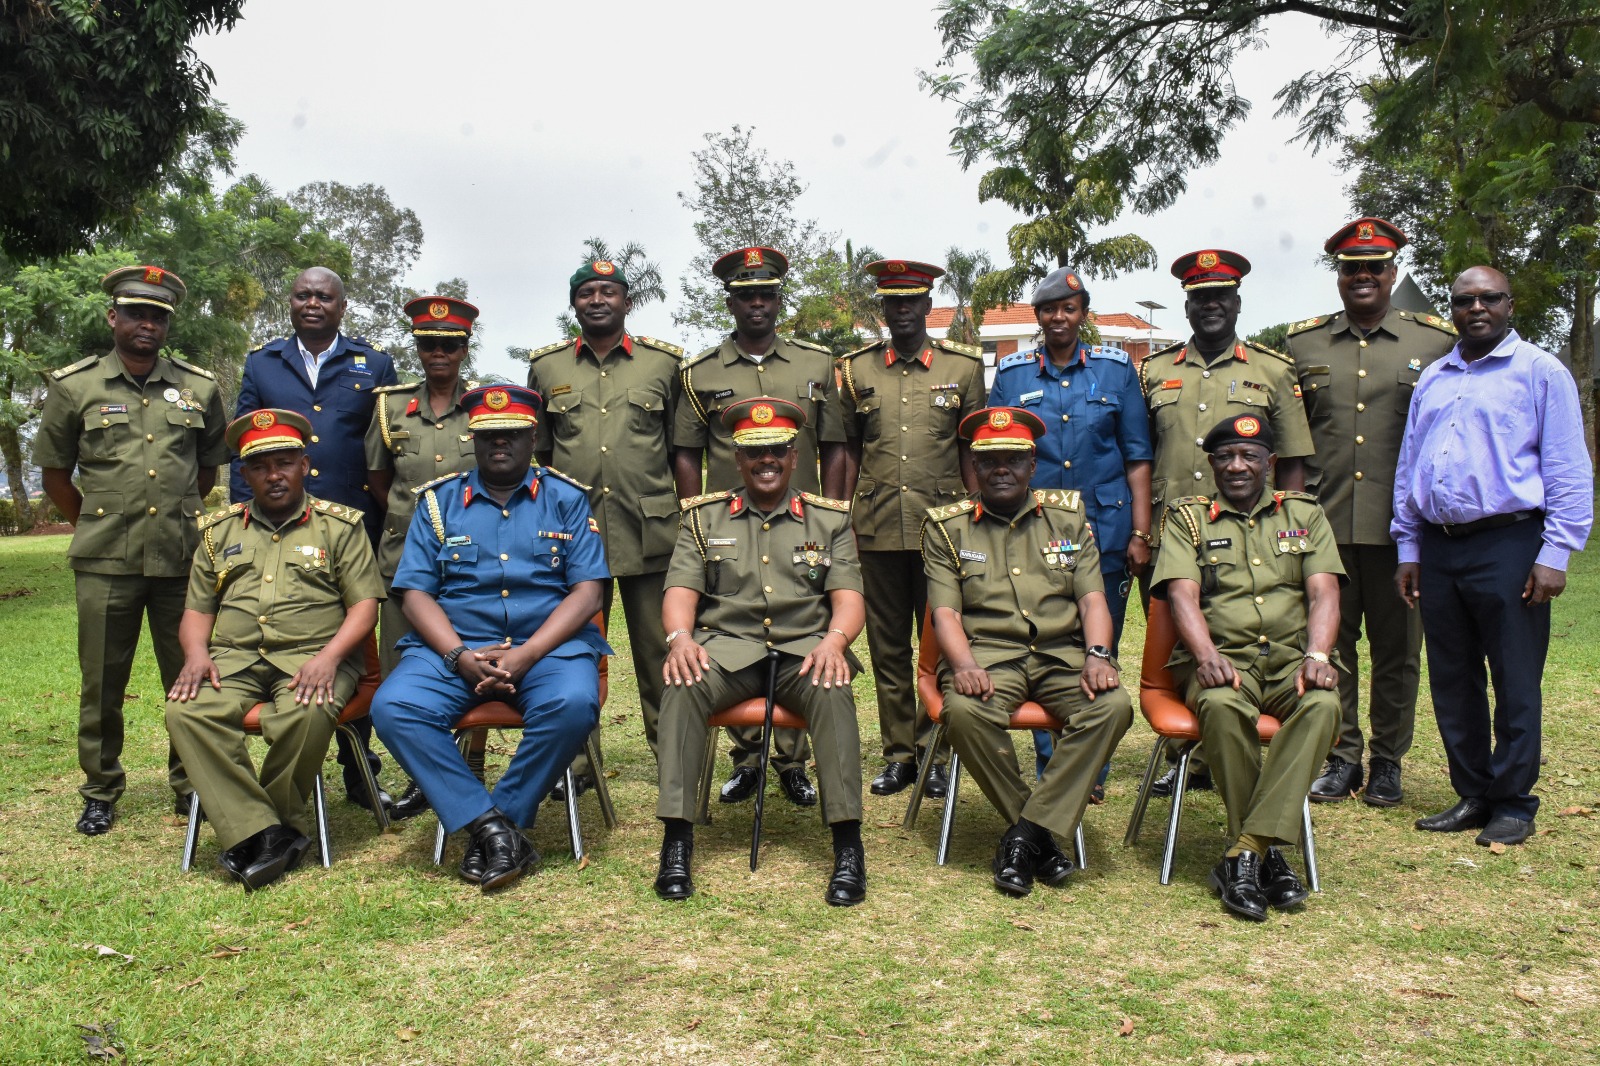 We Need to Ensure Security of Vital Assets and Strategic Installations - Major General Kyanda